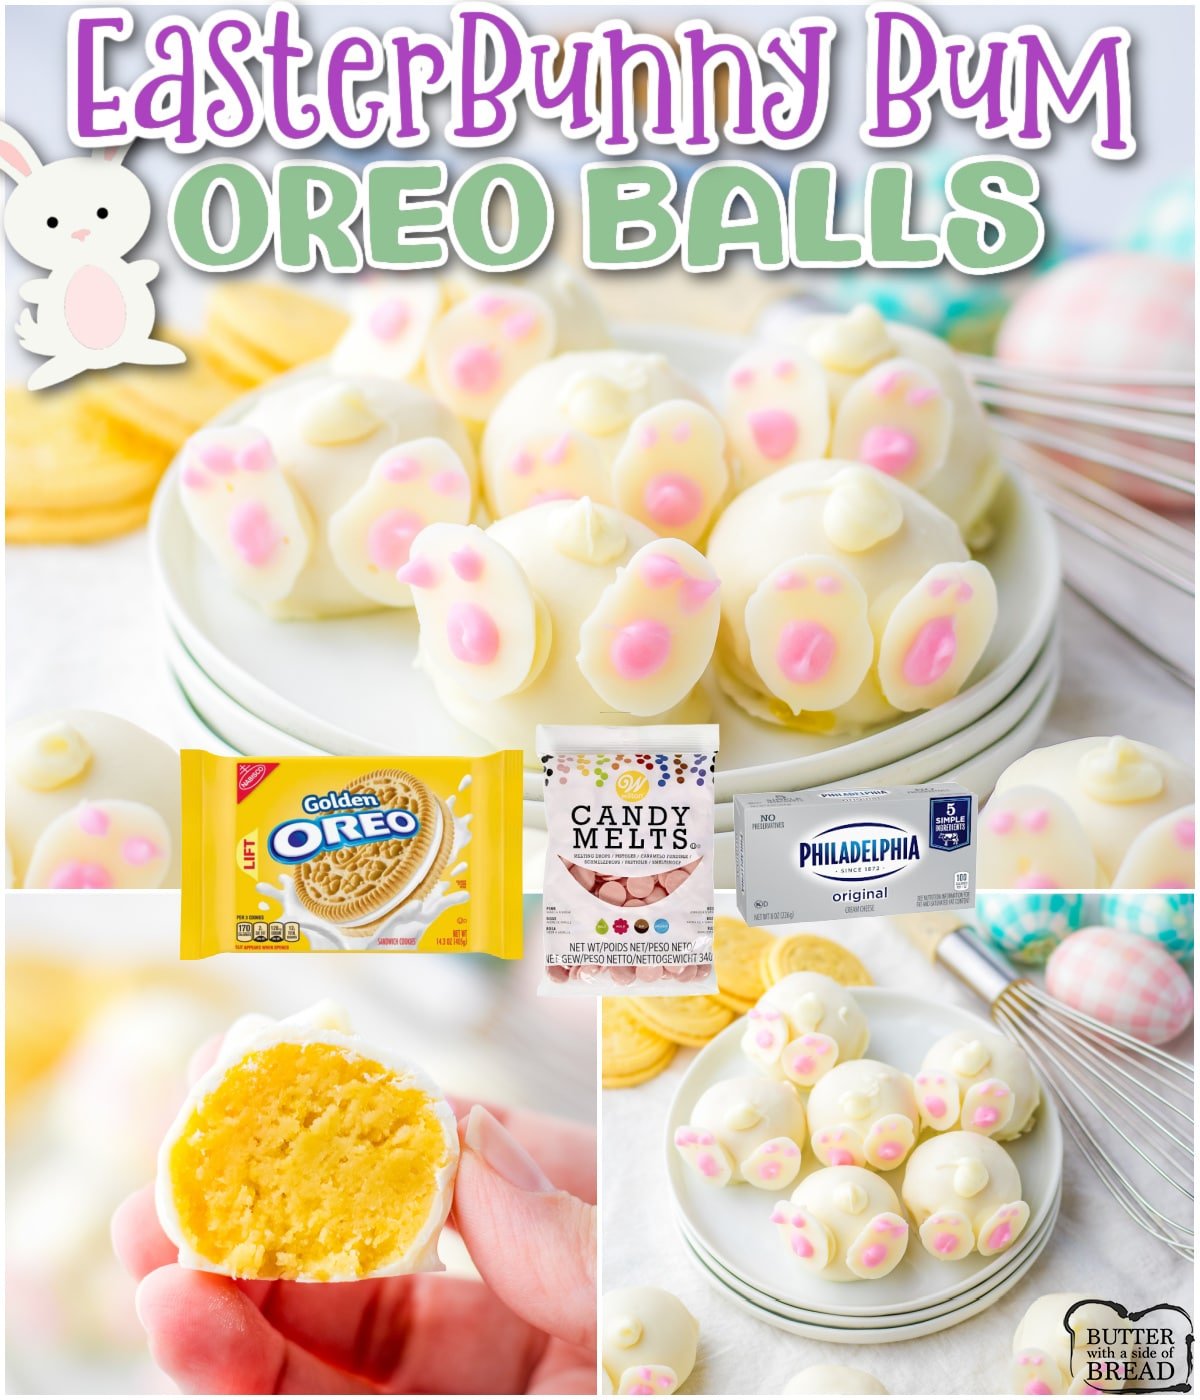 Adorable Easter Bunny Oreo Balls made with crushed cookies mixed with cream cheese, rounded & dipped in white candy to look like darling bunny bums!